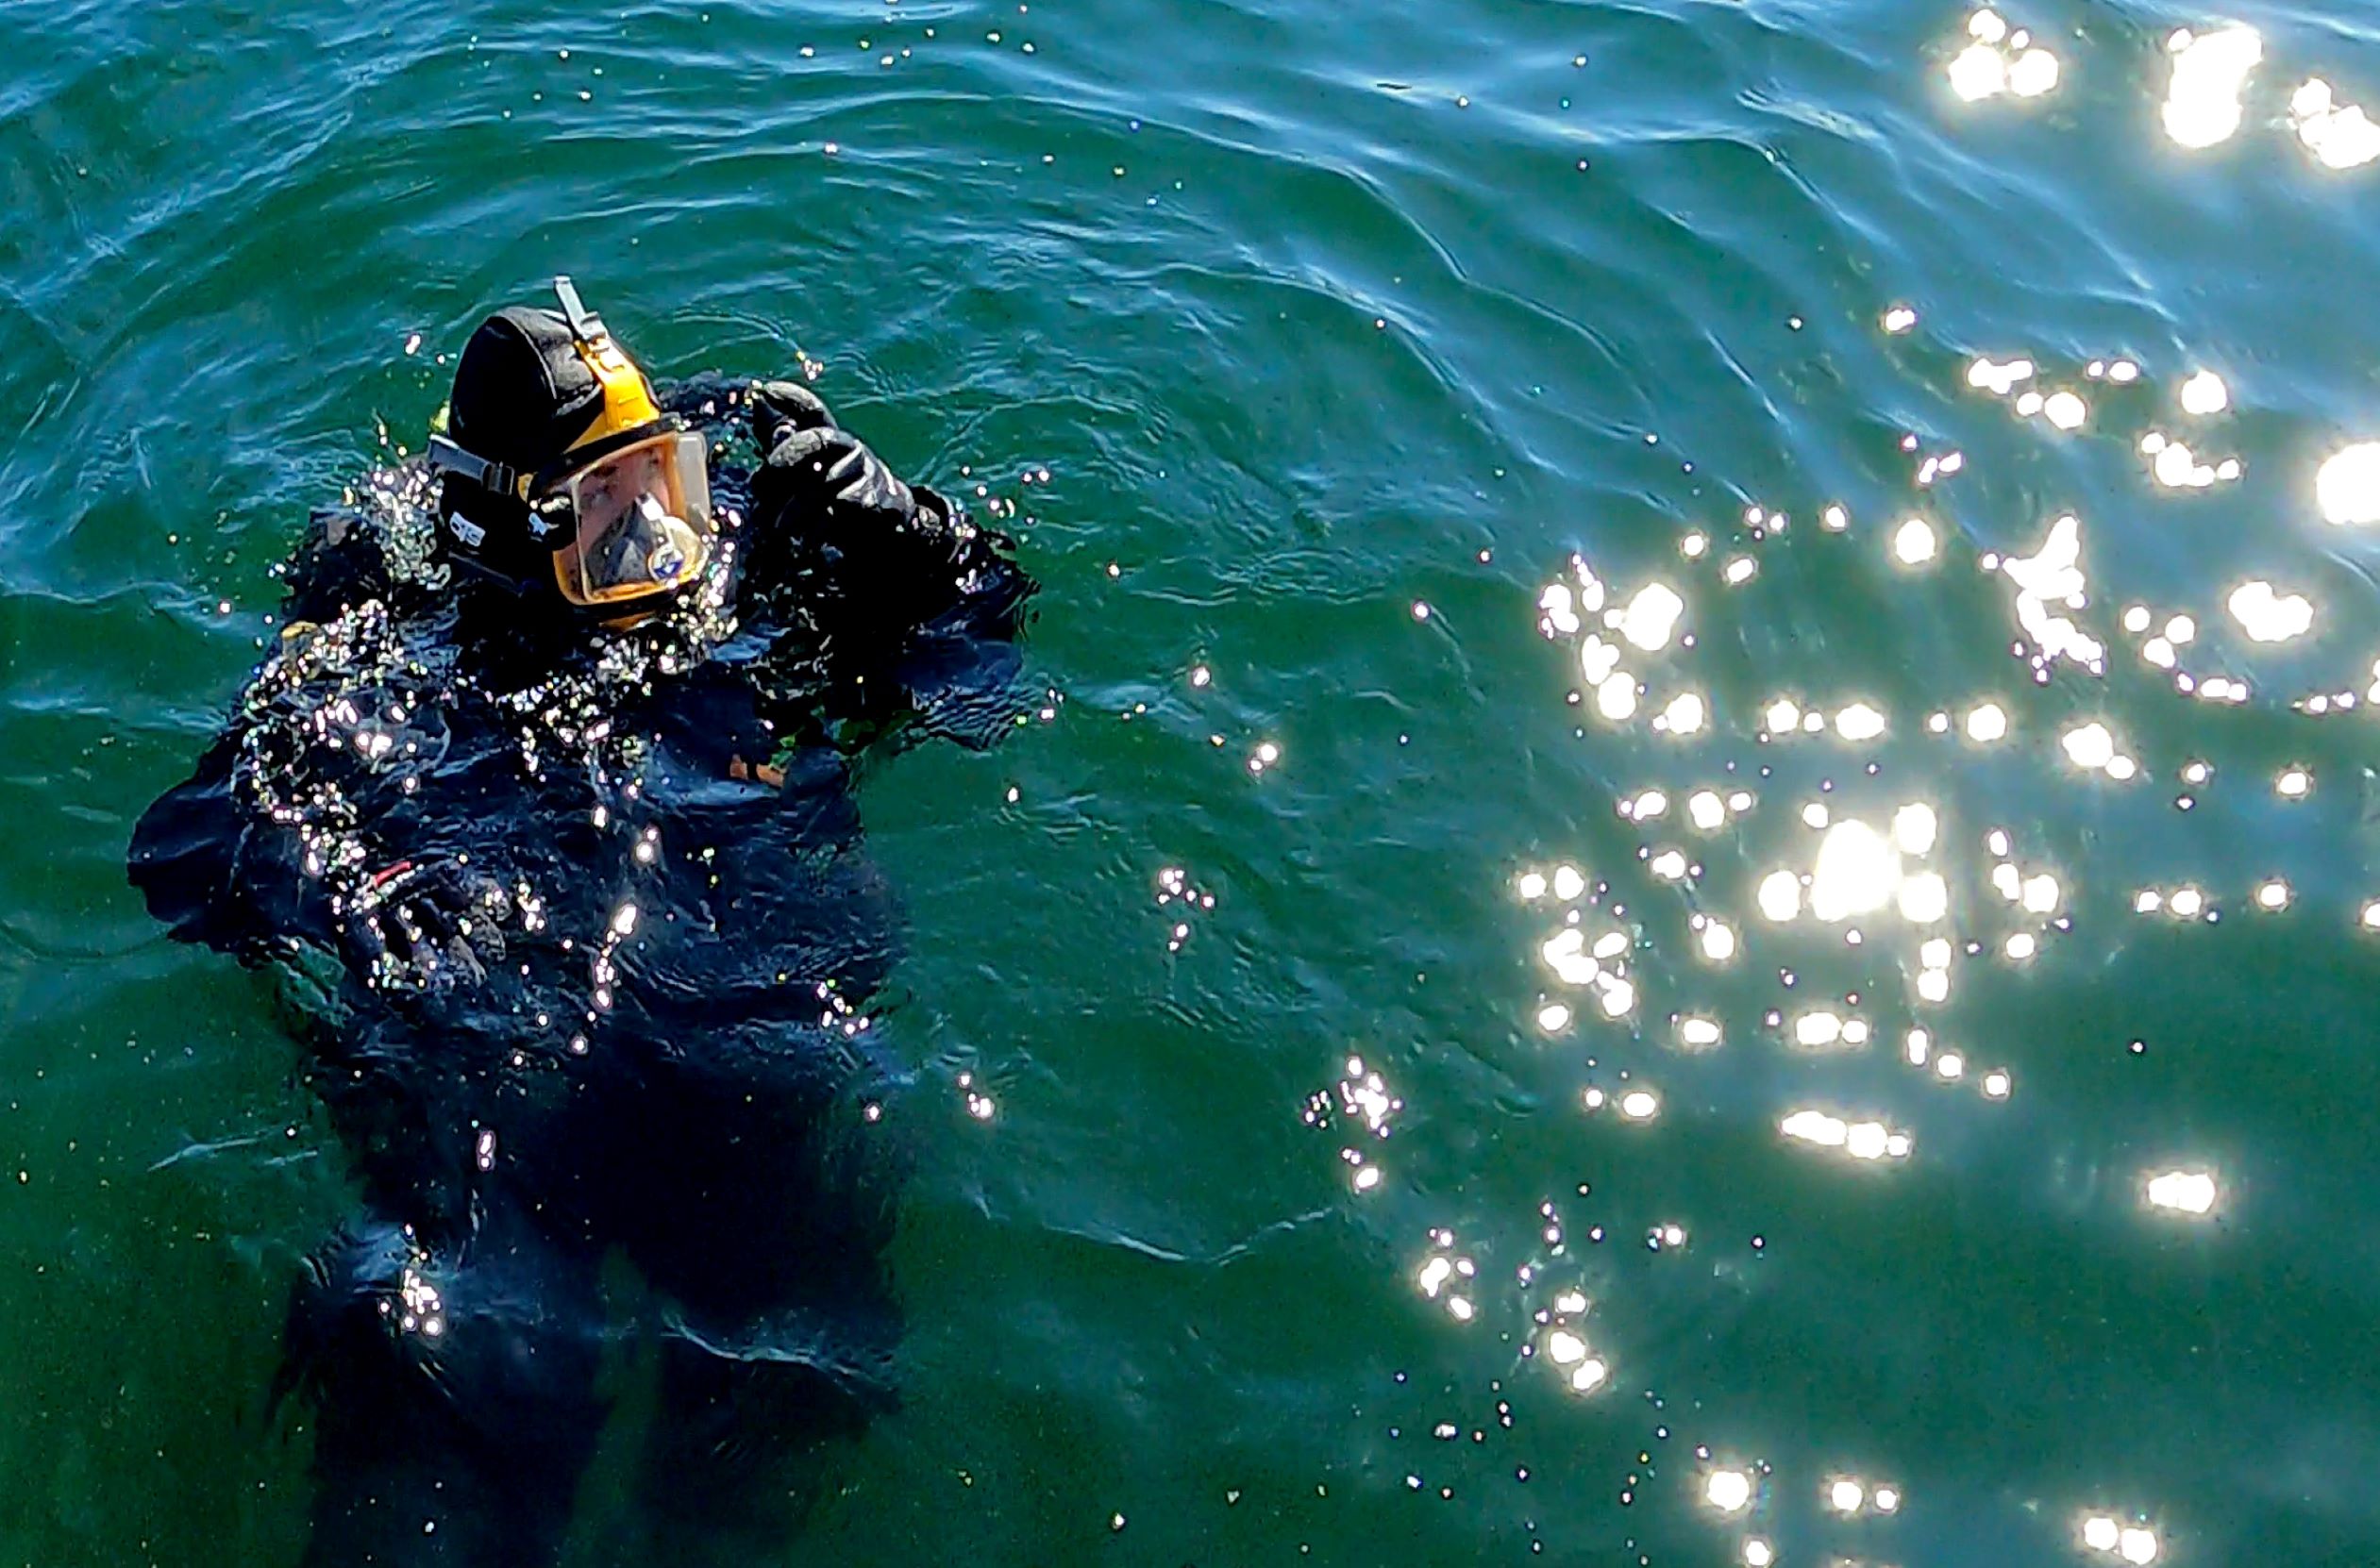 PNNL diver Kailan Mackereth preparing to deploy inert unexploded ordnance in the Sequim Bay test bed.